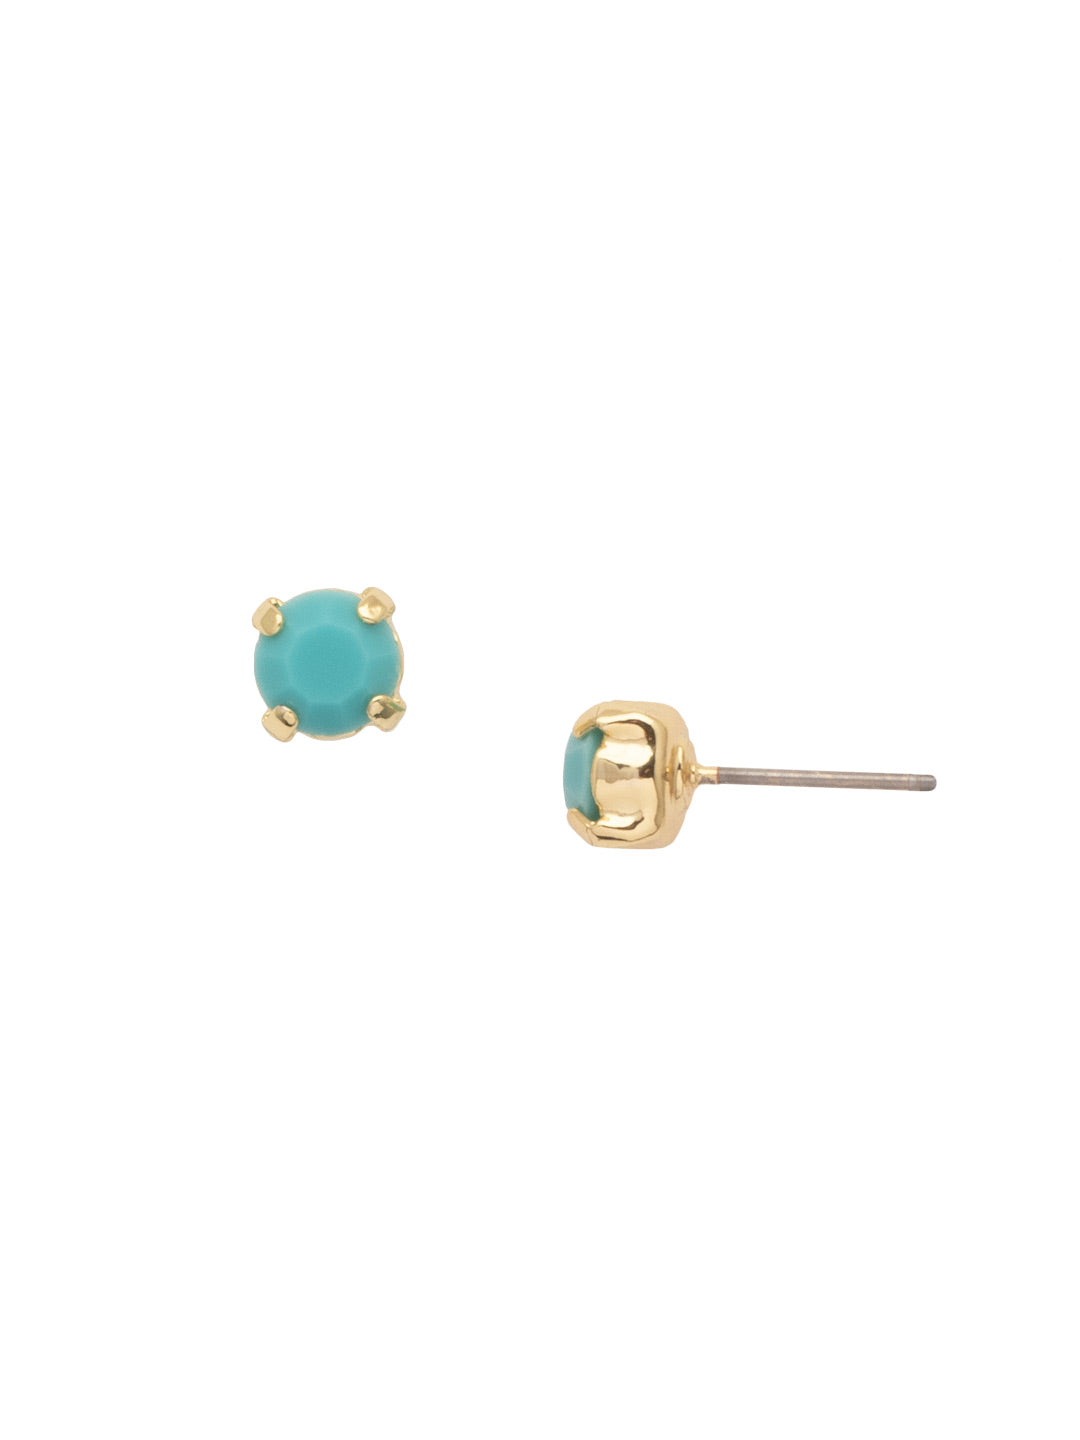 Jayda Stud Earrings - EDN32BGSTO - <p>The Jayda Stud Earrings are the perfect every day wardrobe staple. A round crystal nestles perfectly in a metal plated post with four prongs. </p><p>Need help picking a stud? <a href="https://www.sorrelli.com/blogs/sisterhood/round-stud-earrings-101-a-rundown-of-sizes-styles-and-sparkle">Check out our size guide!</a> From Sorrelli's Santorini collection in our Bright Gold-tone finish.</p>